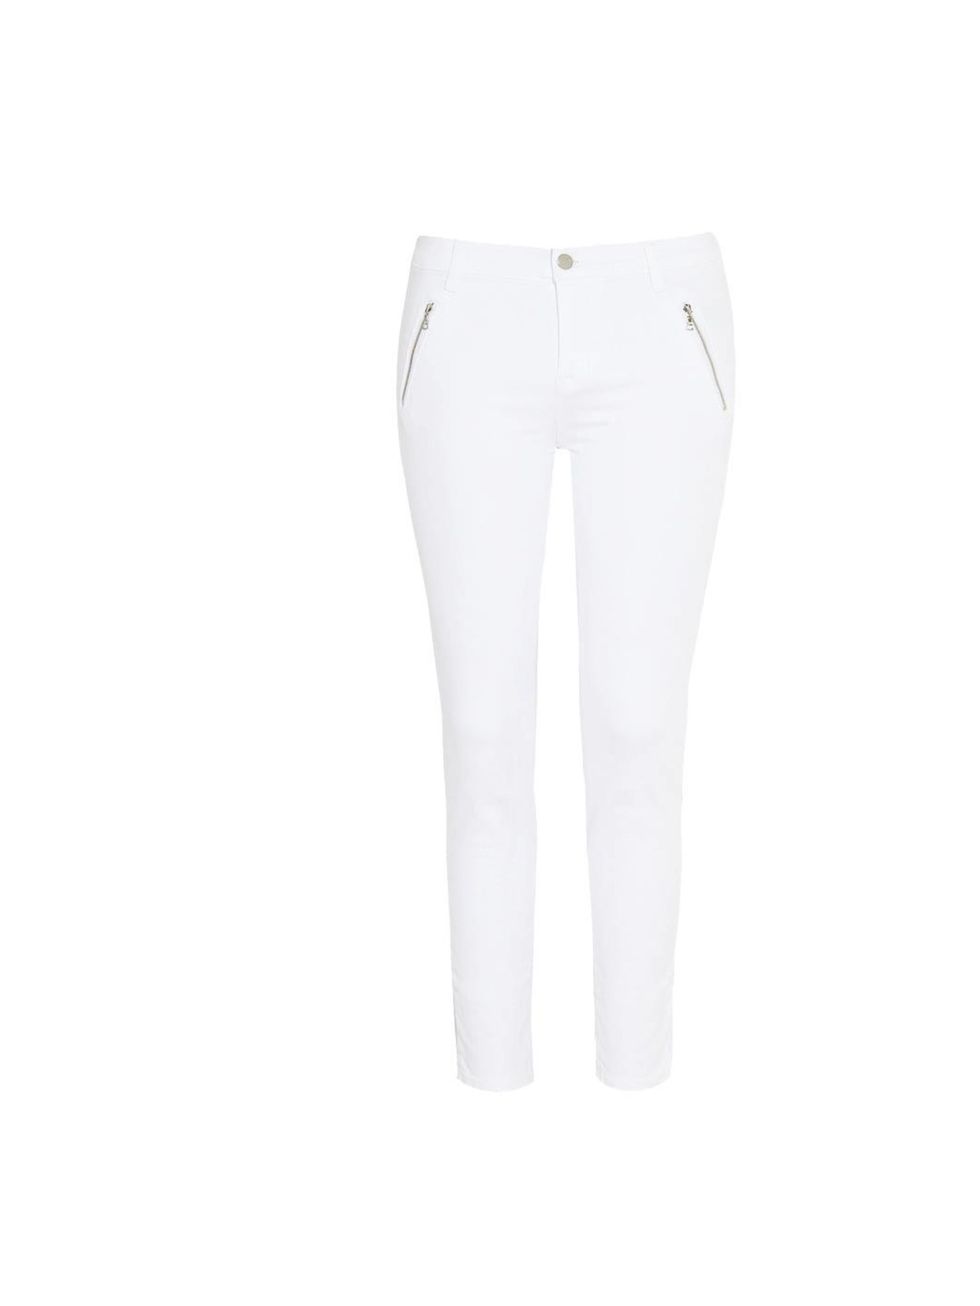 <p>The new minimalism offers maximum impact - J Brand 'Carey' zipped mid-rise skinny jeans nail the trend, £290, at <a href="http://www.net-a-porter.com/product/369140">Net-a-Porter</a></p>